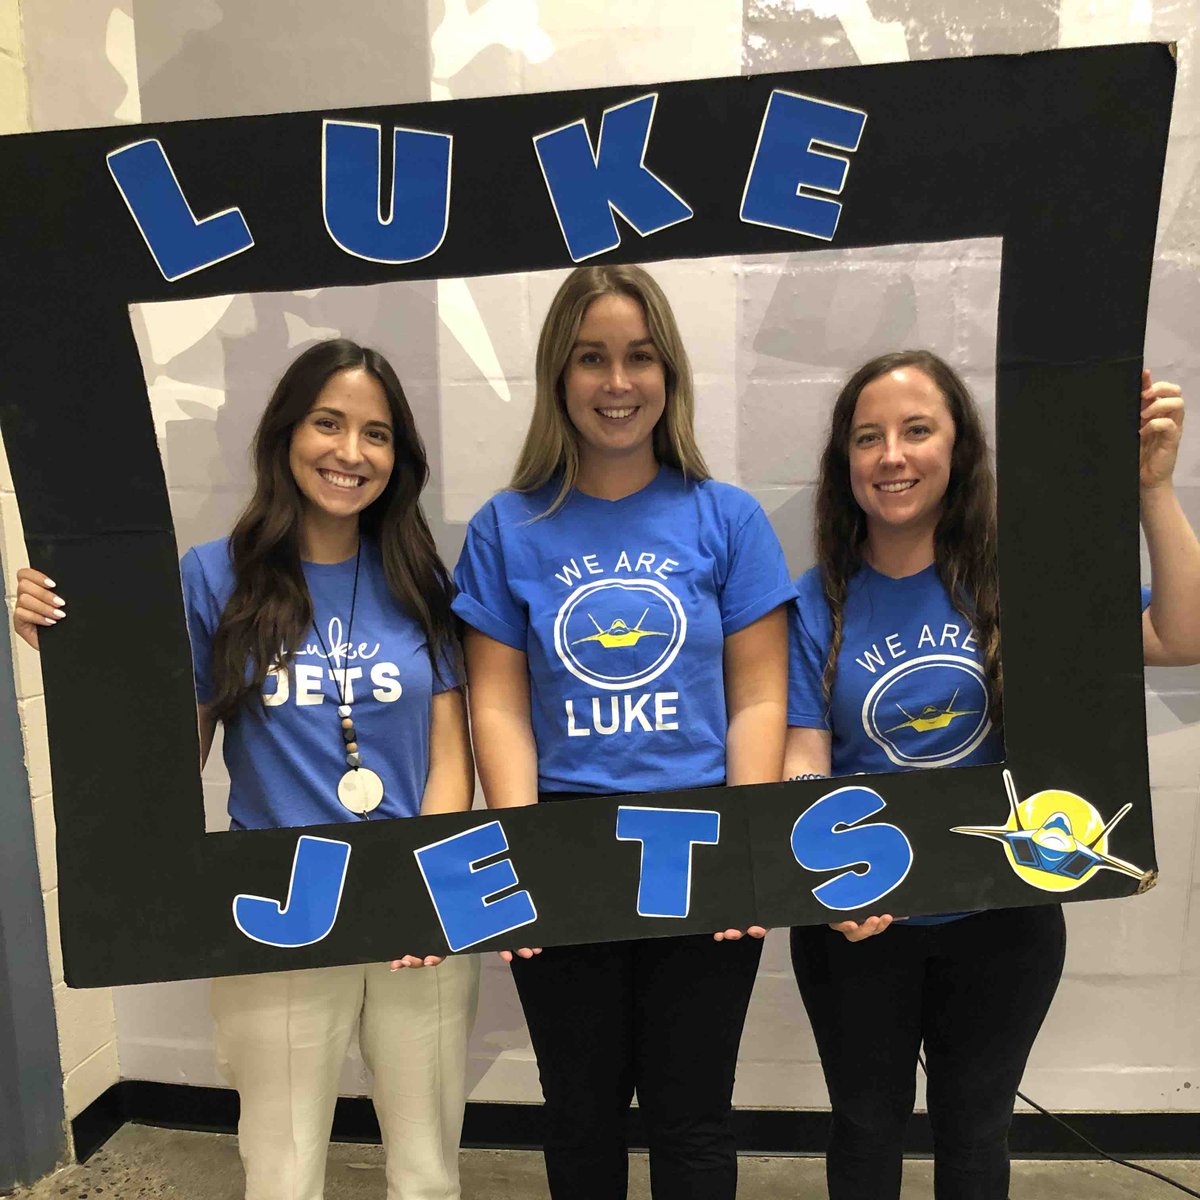 Meet your Jets Monday features 2nd grade - Mrs. Brown, Ms. Harshman & Ms. Mead! They are always positive and always expect best efforts from their Jets! 💙⭐️✈️ #oneteamonemission #believeinALL